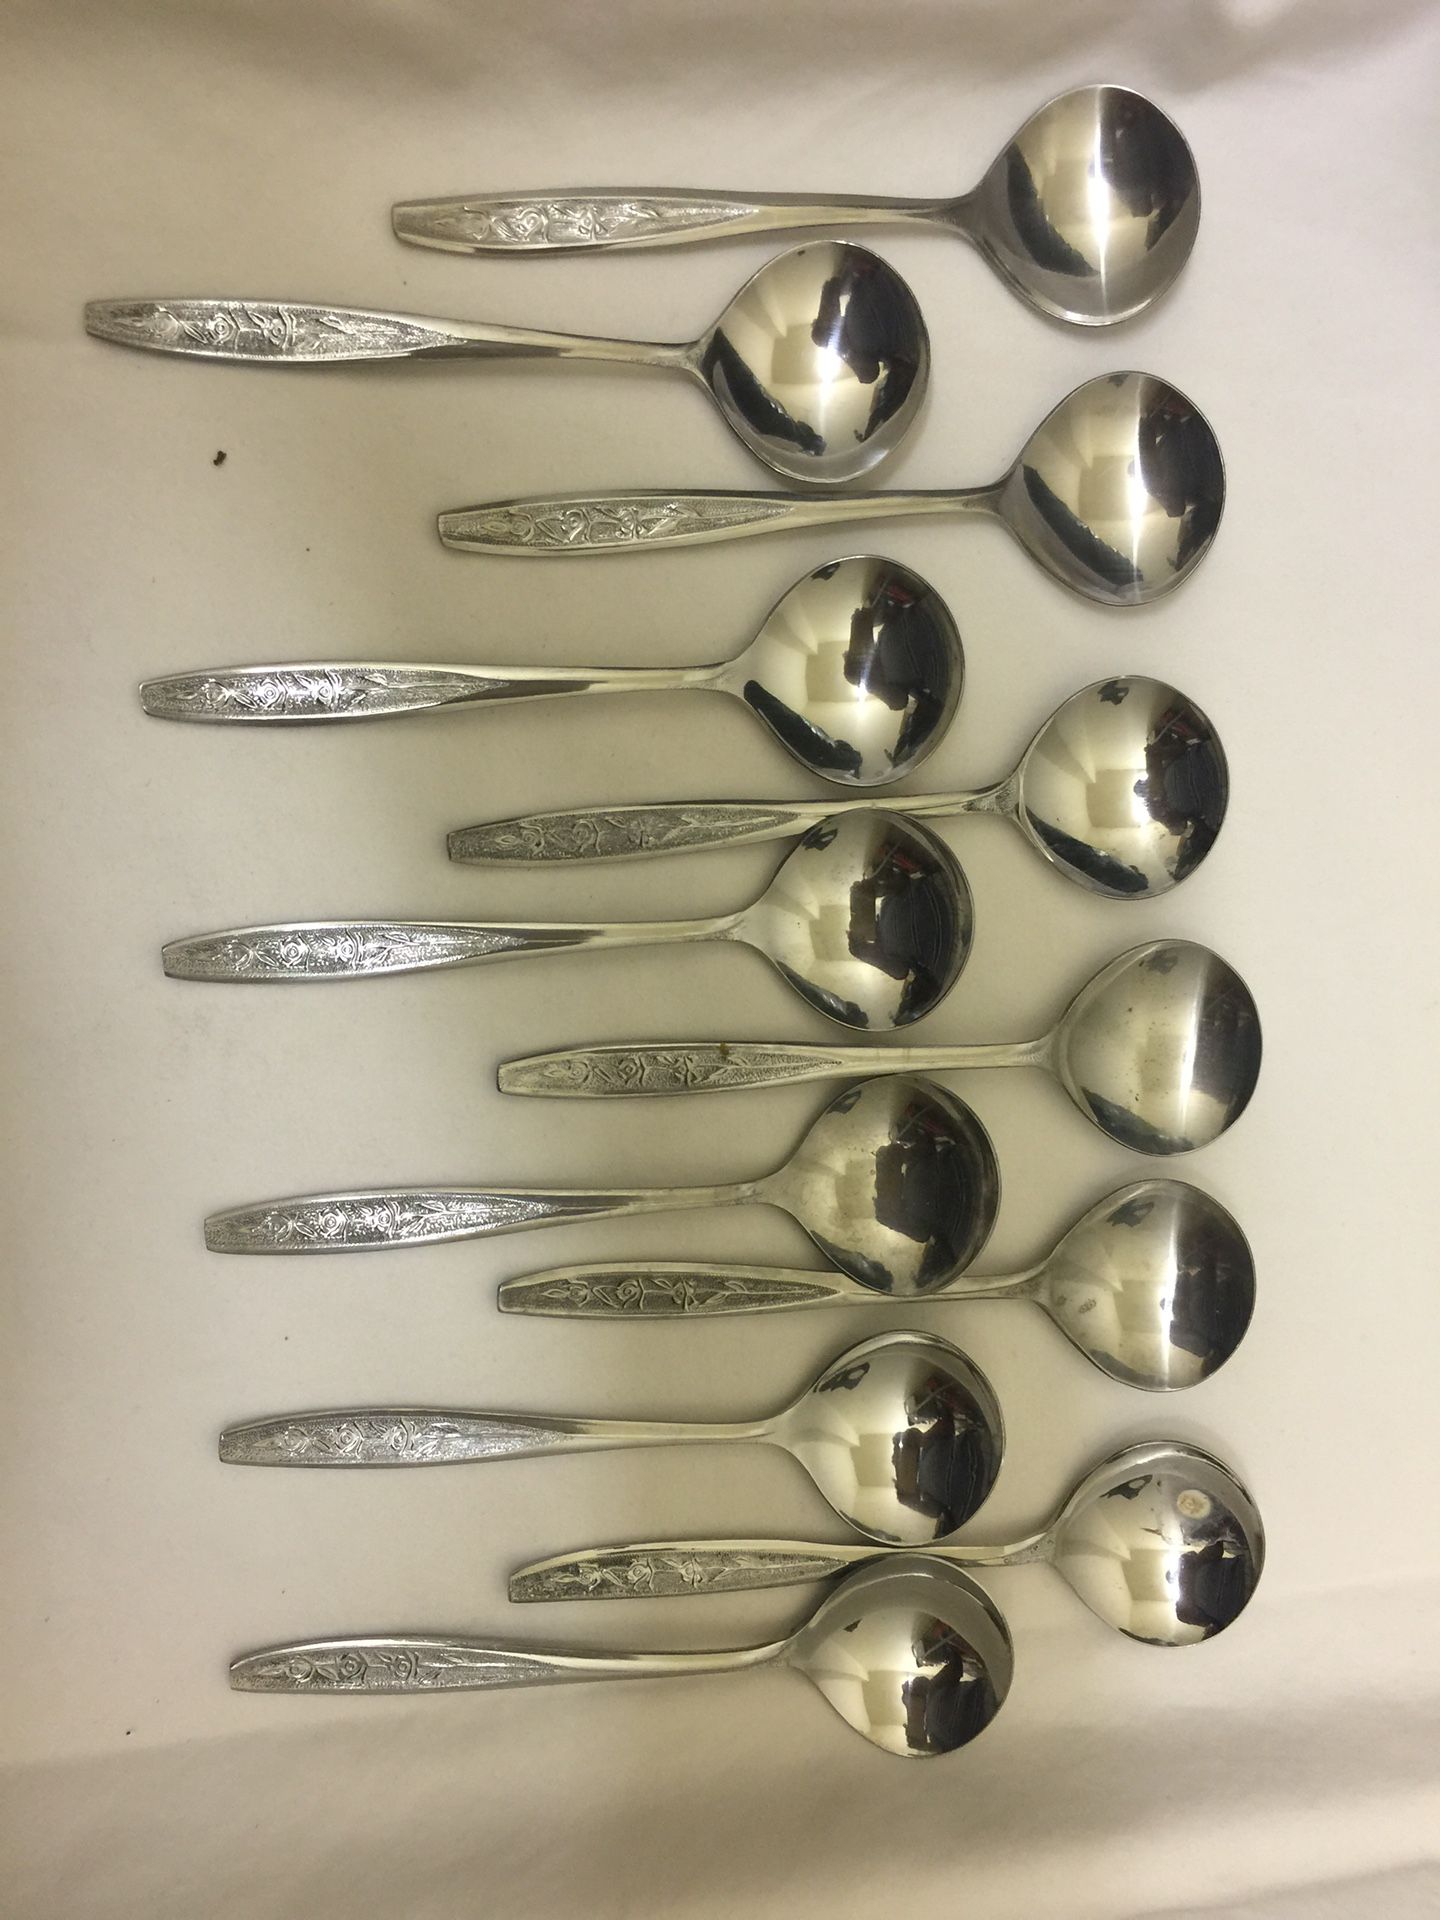 Bouillon spoons 18 for $10 new in original packinggreat quality